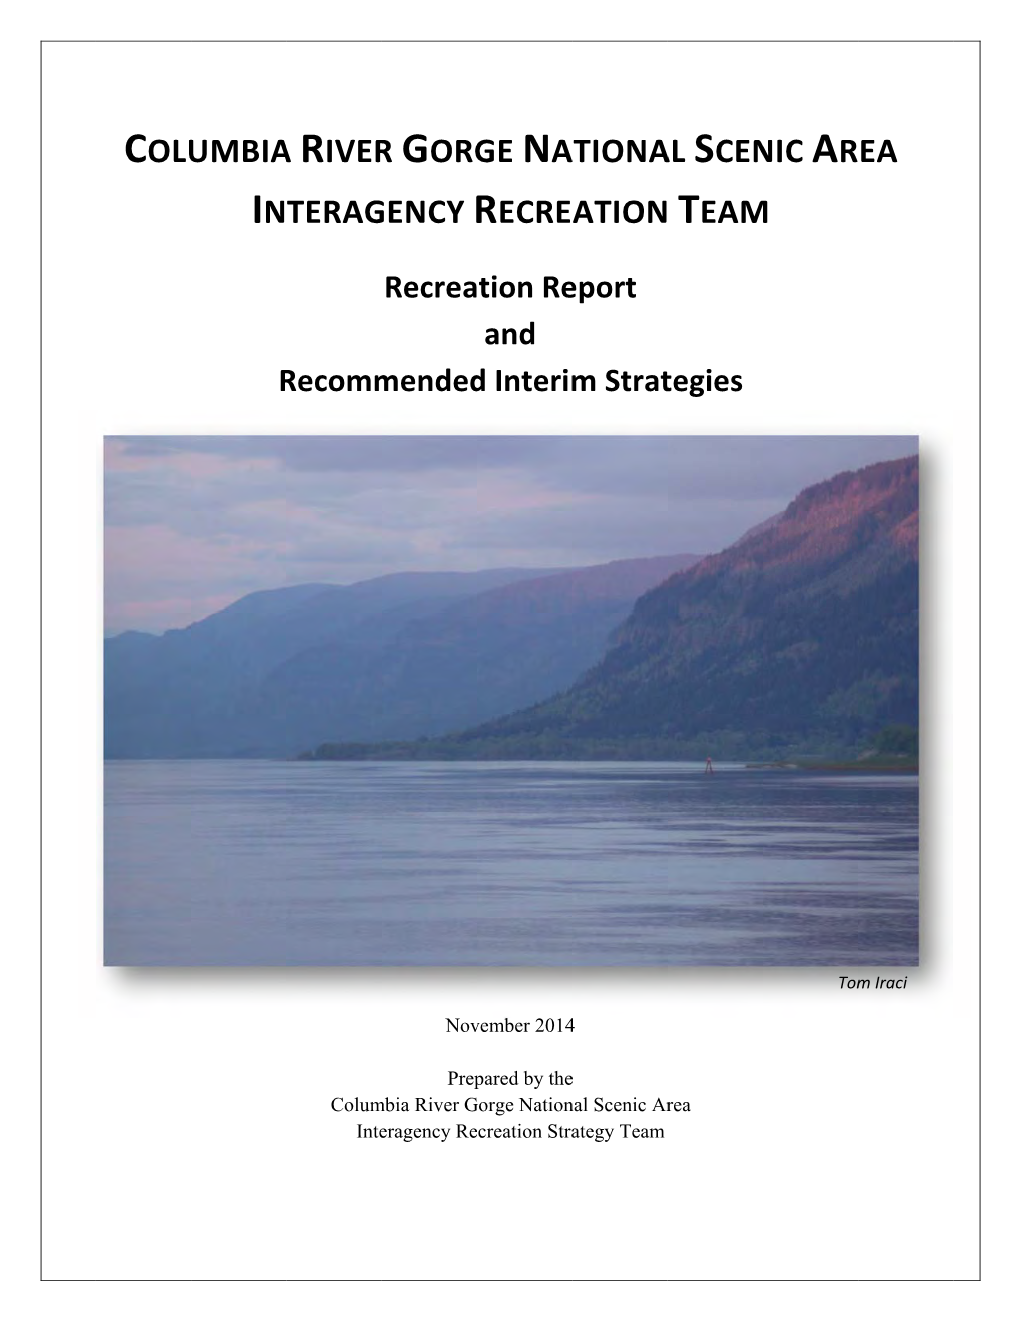 Recreation Report and Recommended Strategies